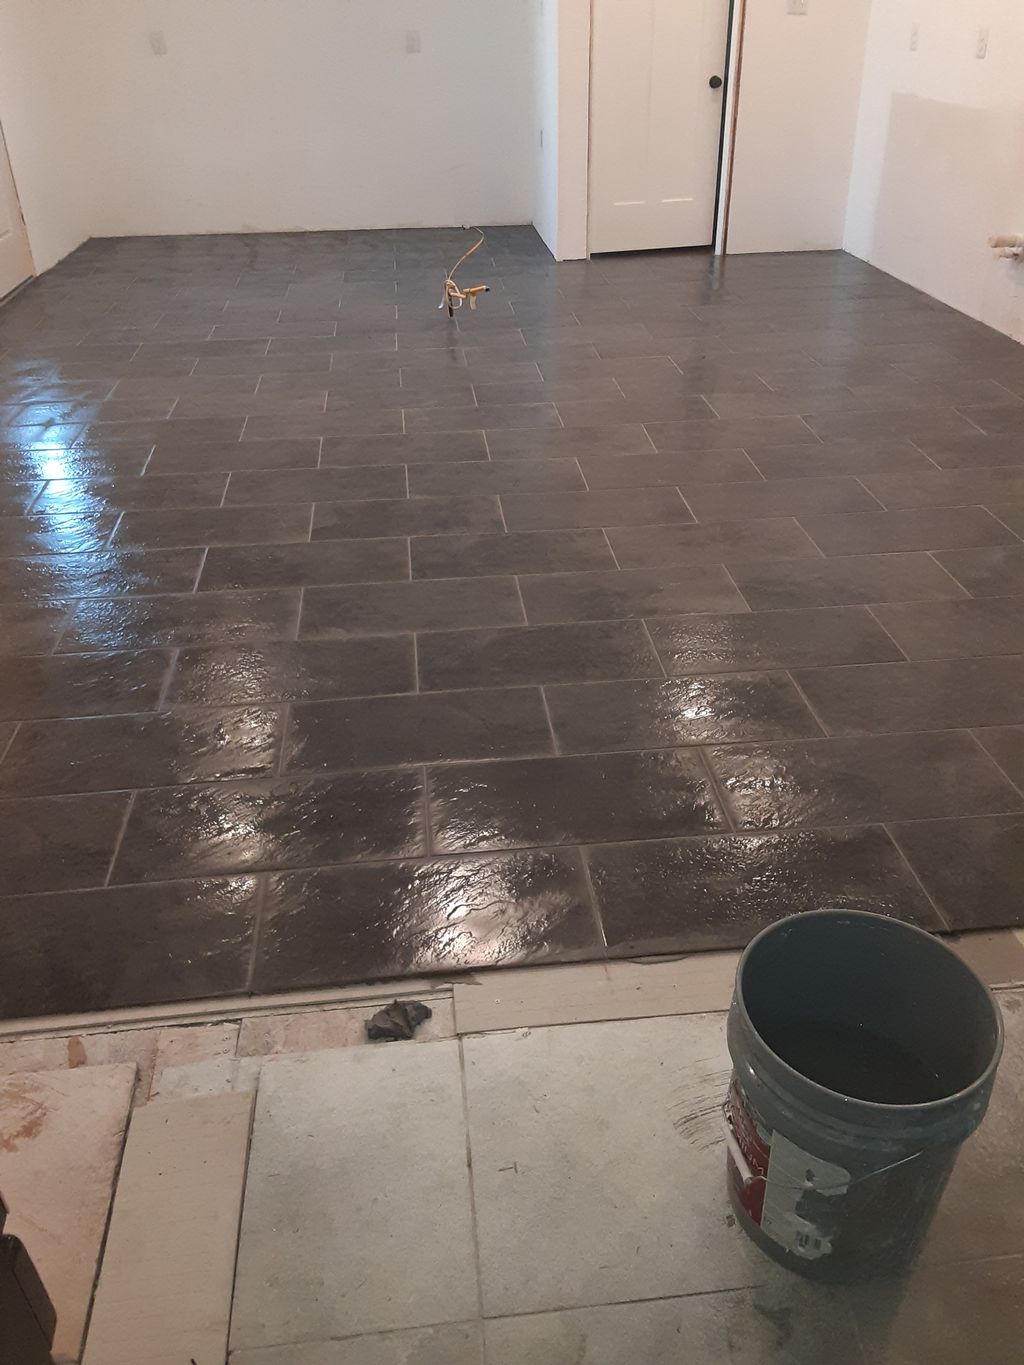 Quality tile and flooring